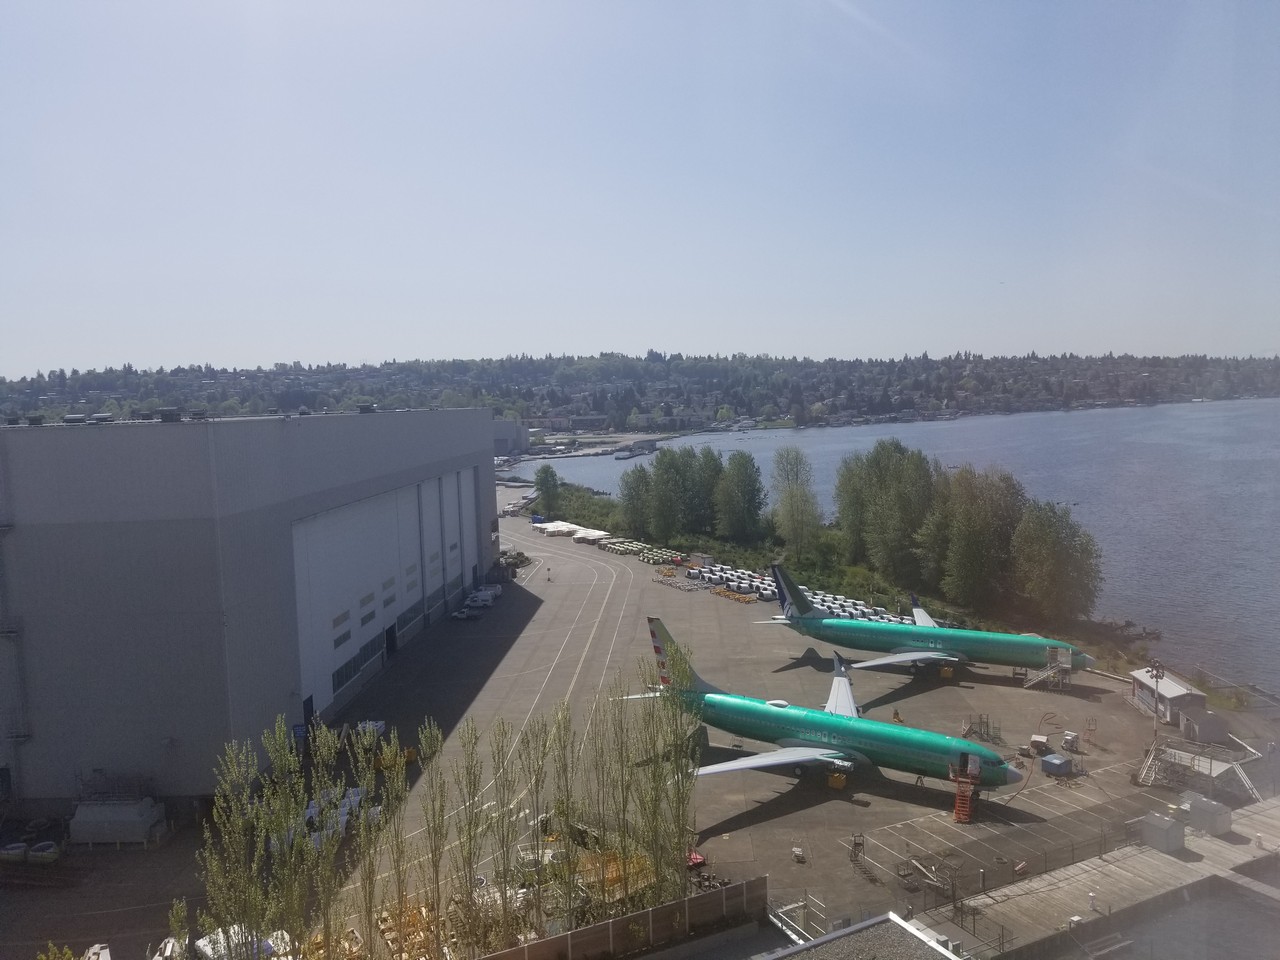 a group of airplanes parked on a parking lot next to a body of water